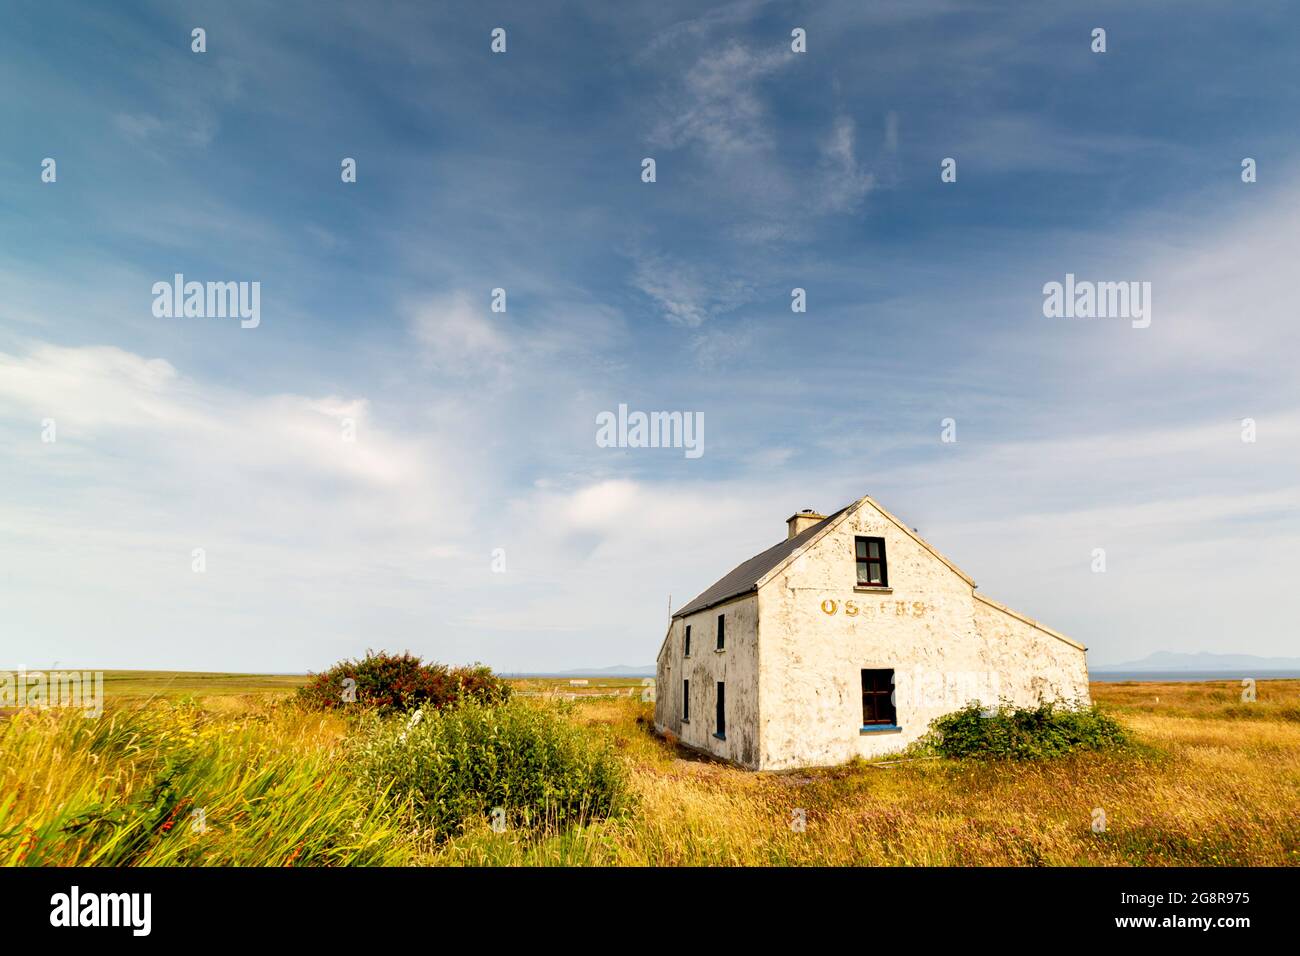 Isolated house on Valentia Island, County Kerry, O'Sheas used in Guinness advert Stock Photo